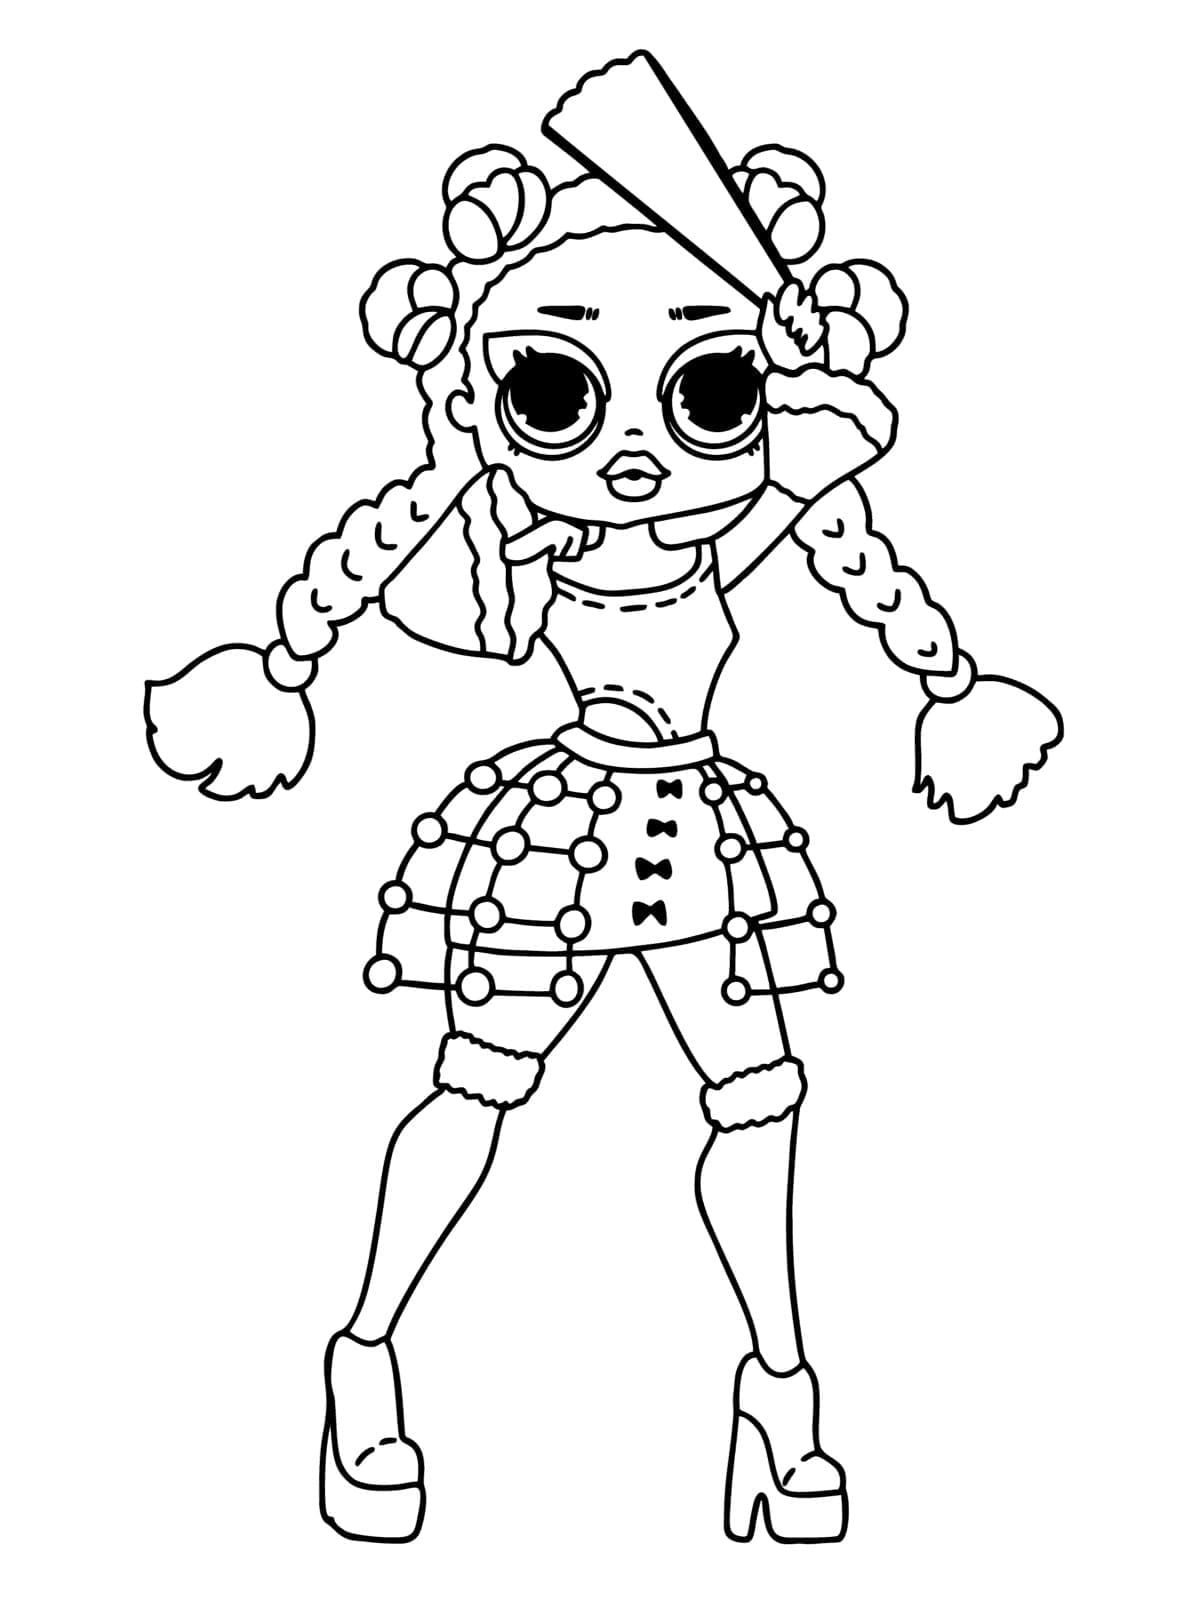 Miss Royale LOL Surprise OMG coloring page